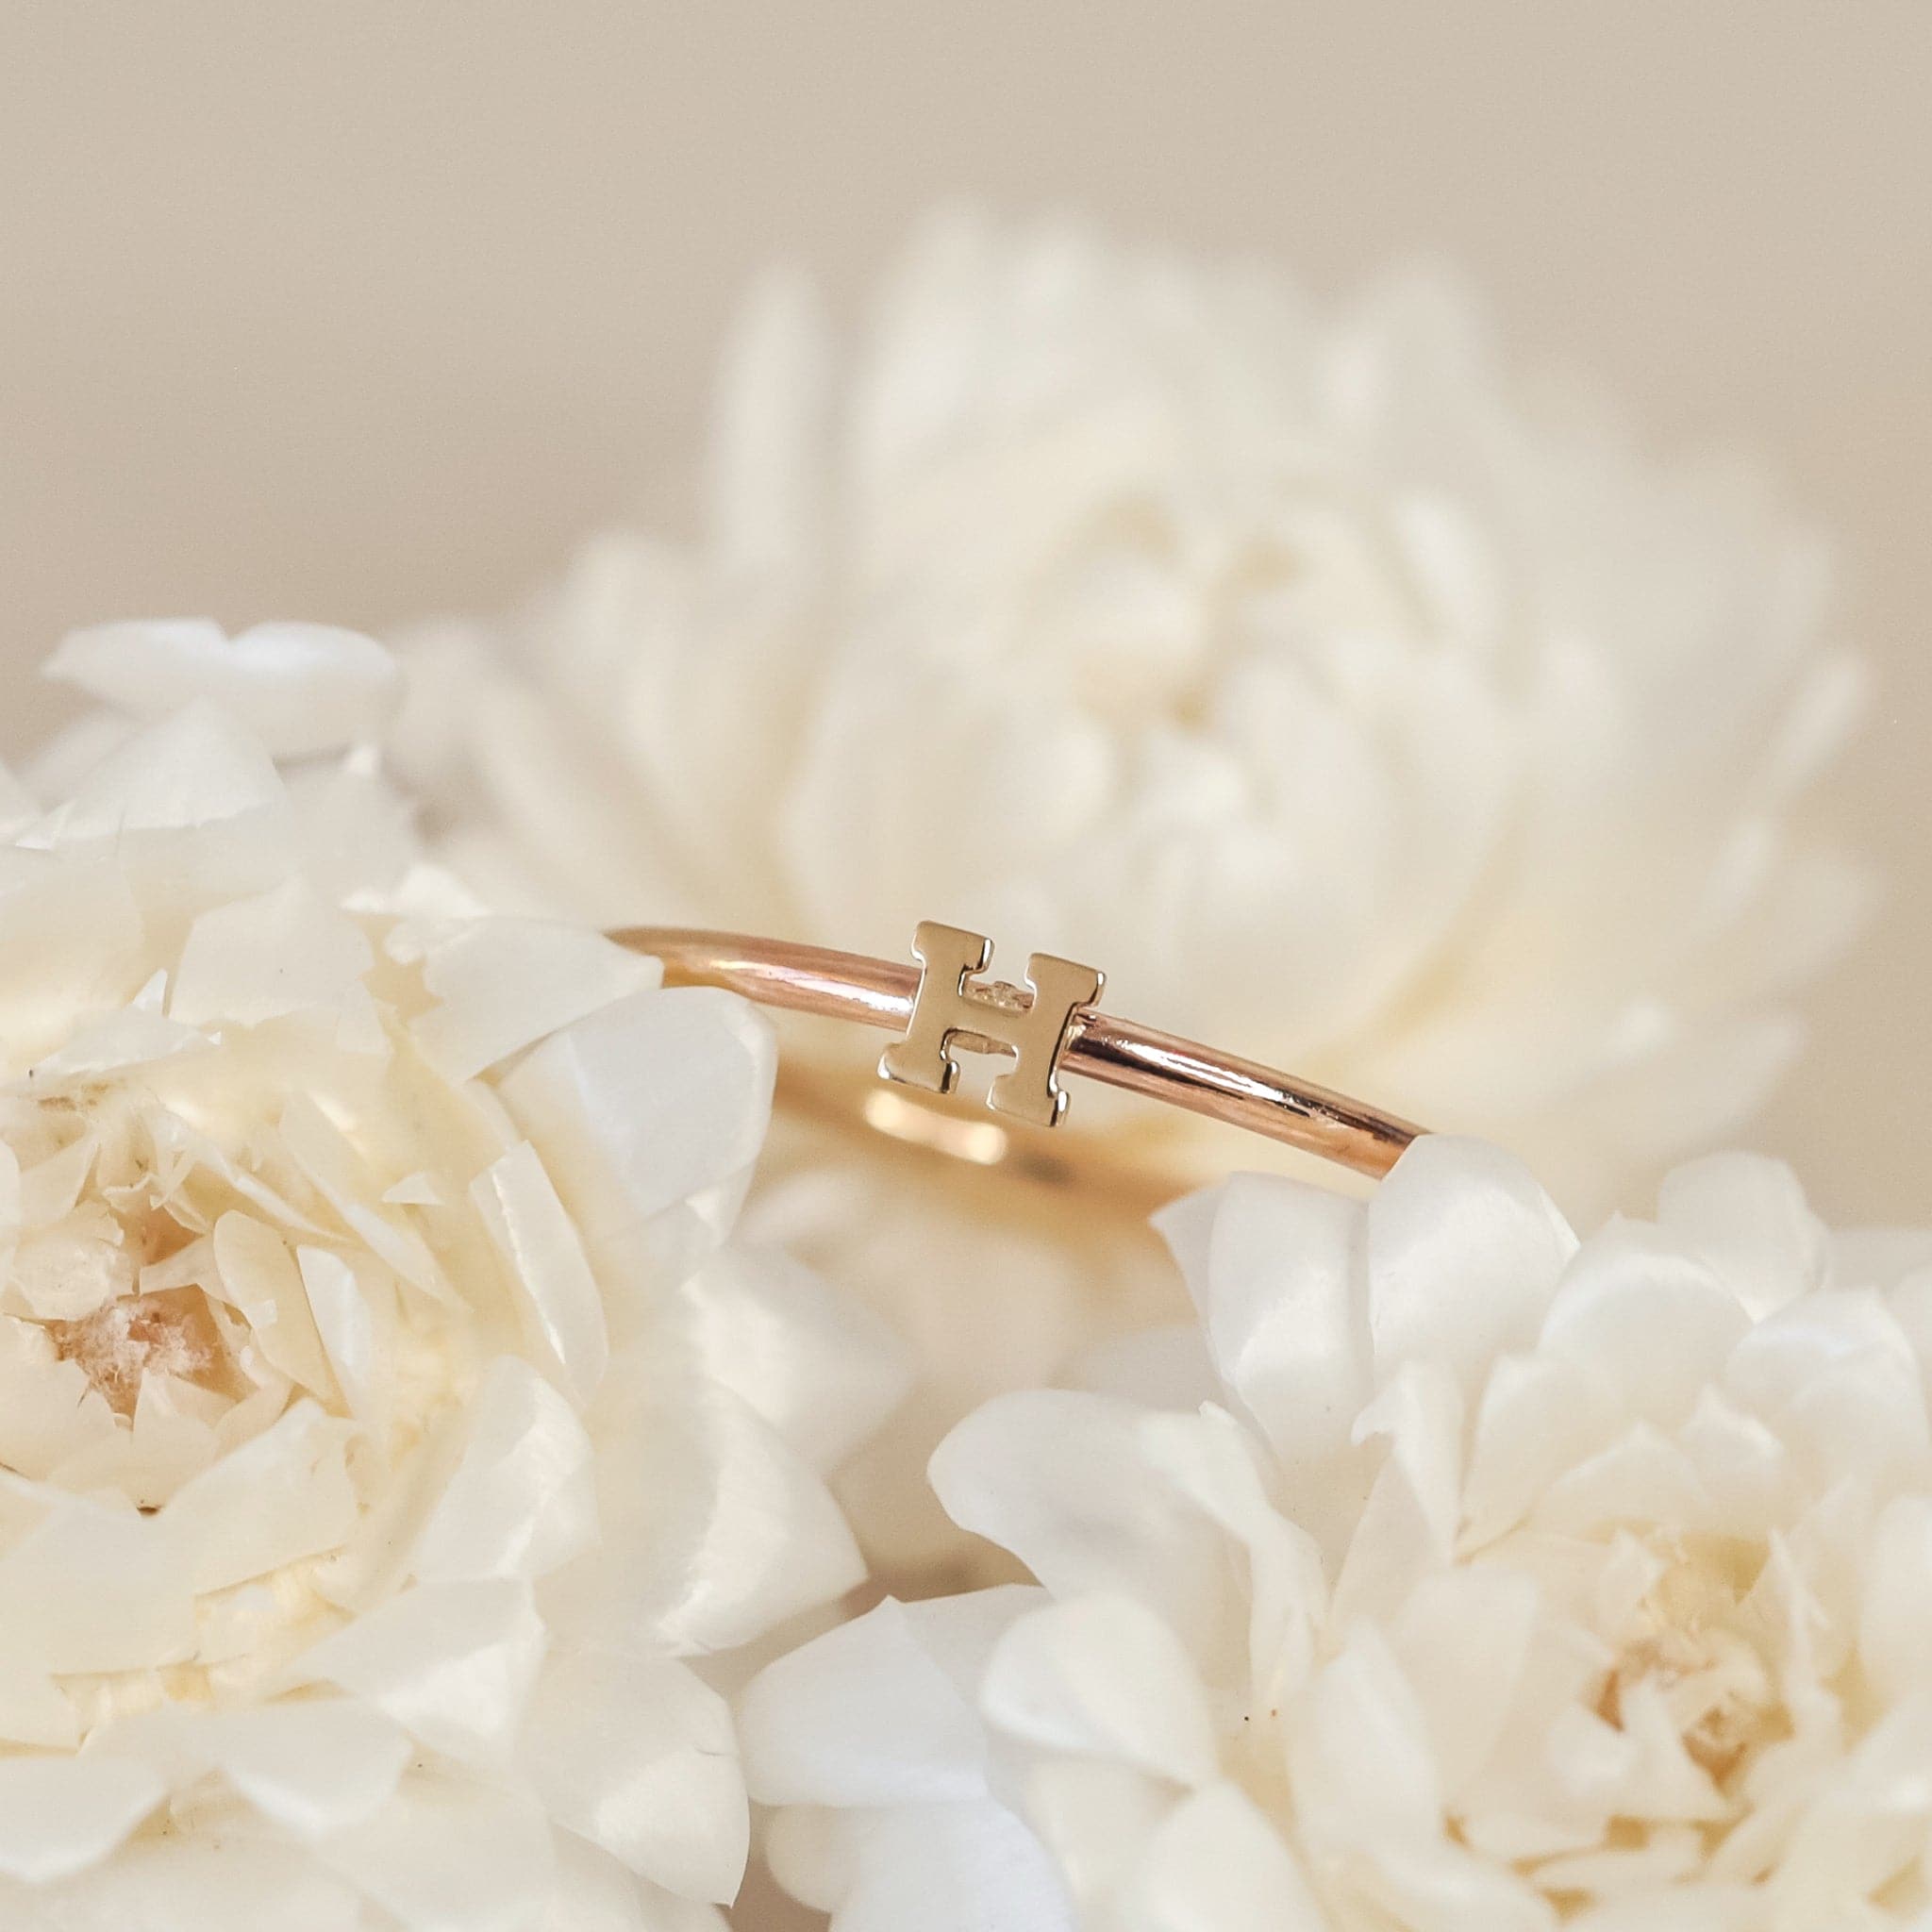 On a cream background is a dainty gold ring with an &quot;H&quot; in the center.